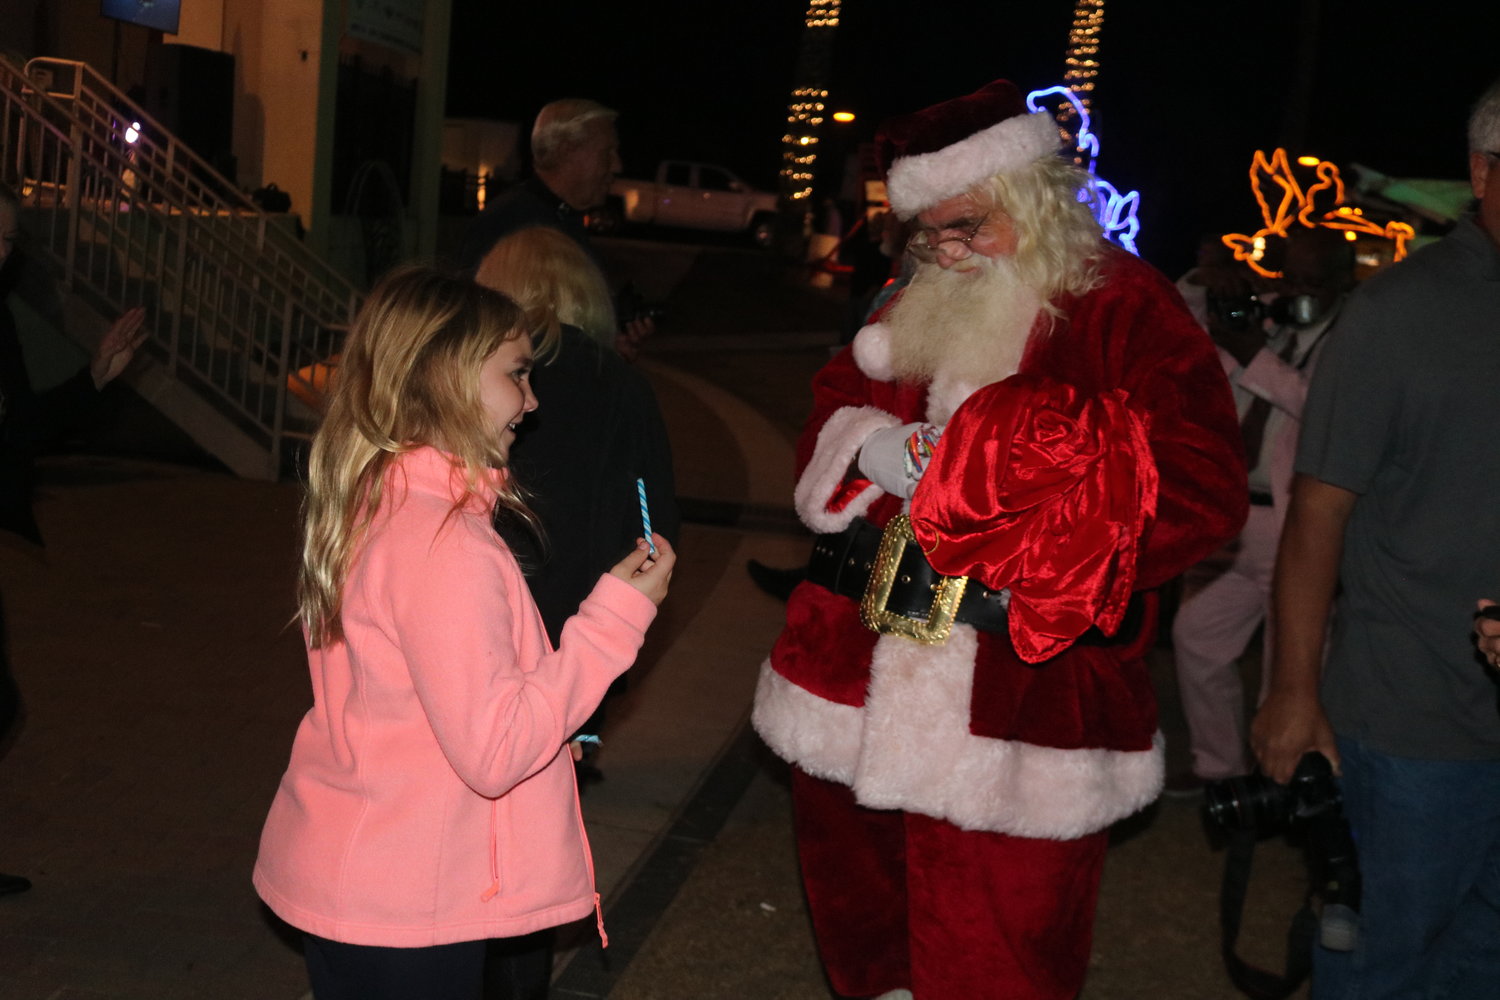 Santa Claus made an appearance and handed out candy canes to children in the crowd.